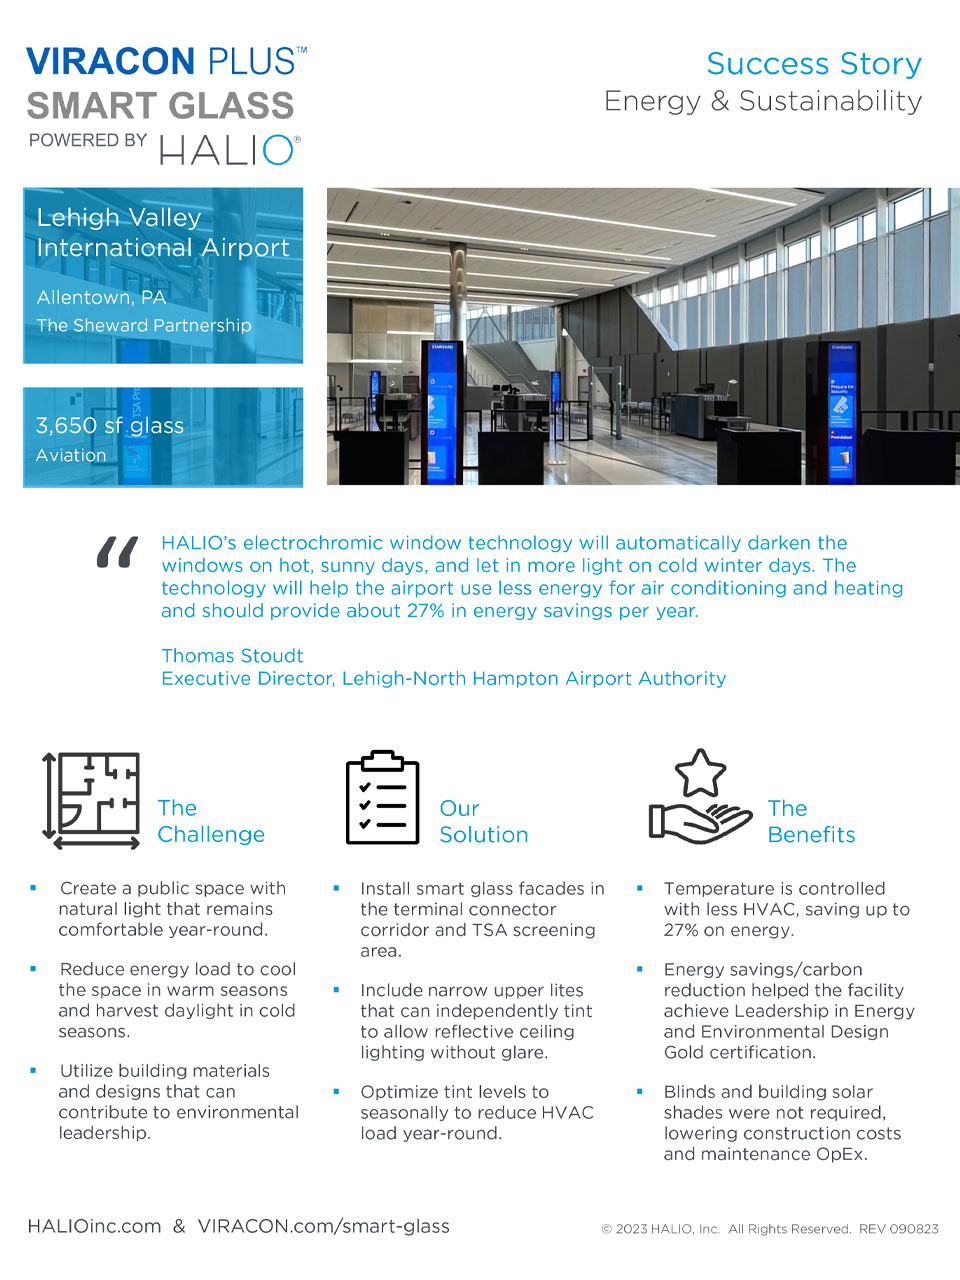 Success Story: Energy & Sustainability, Aviation  Lehigh Valley International Airport, Allentown, PA